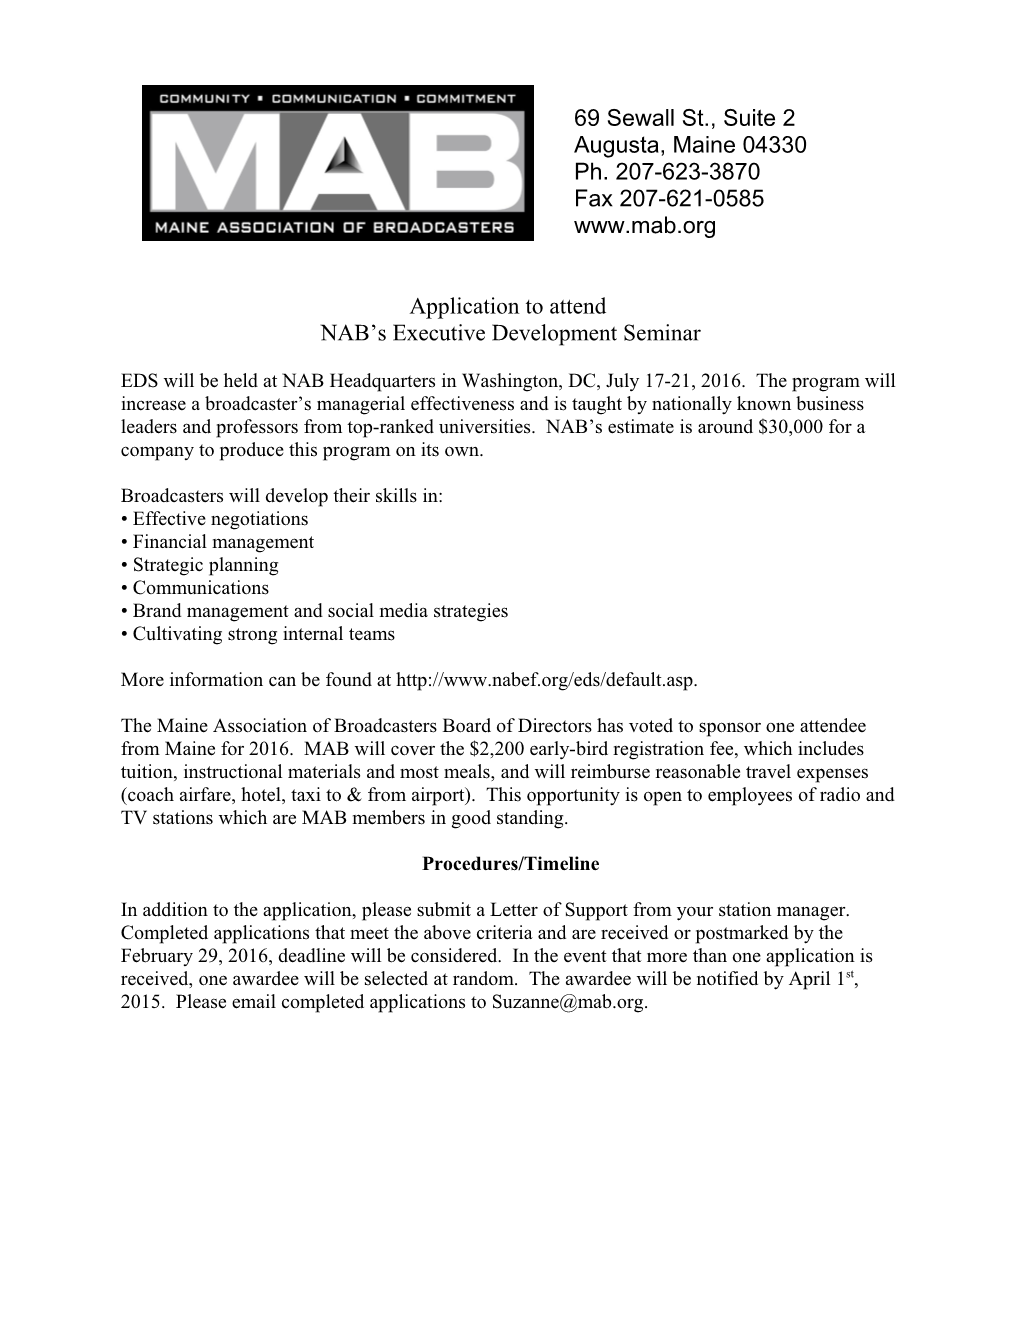 In Affiliation of the Maine Association of Broadcasters